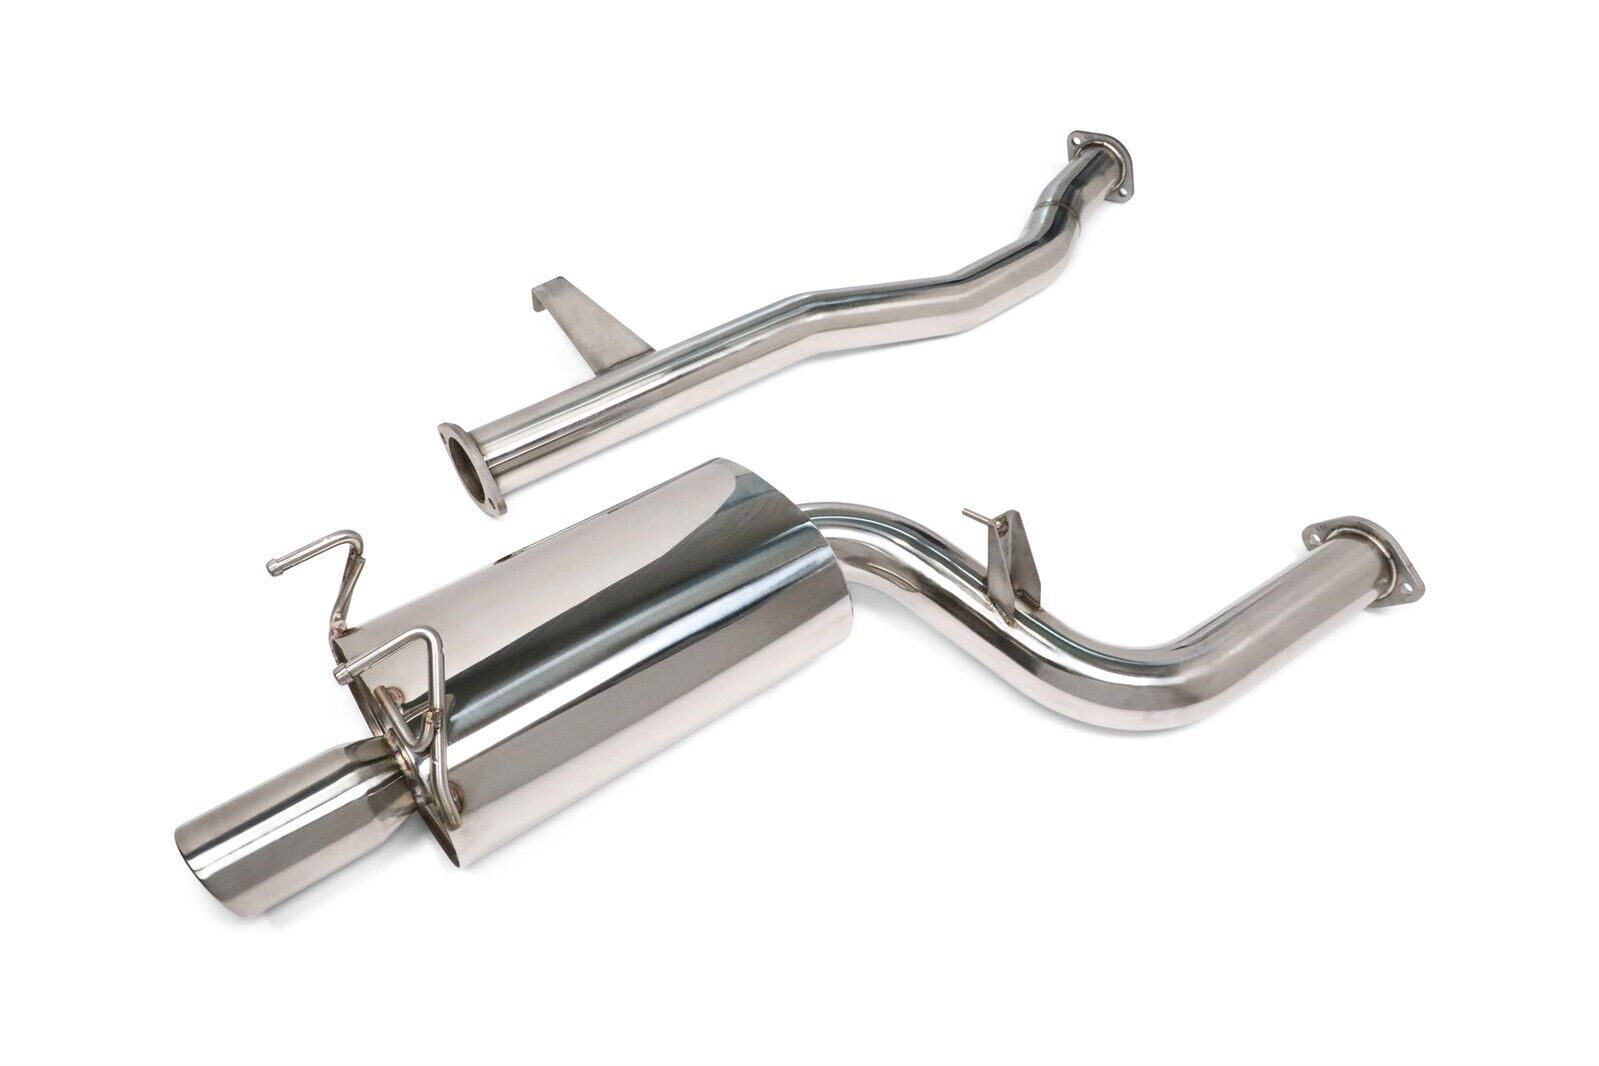 YONAKA CATBACK EXHAUST FOR 89-94 NISSAN 240SX S13 SILVIA 3